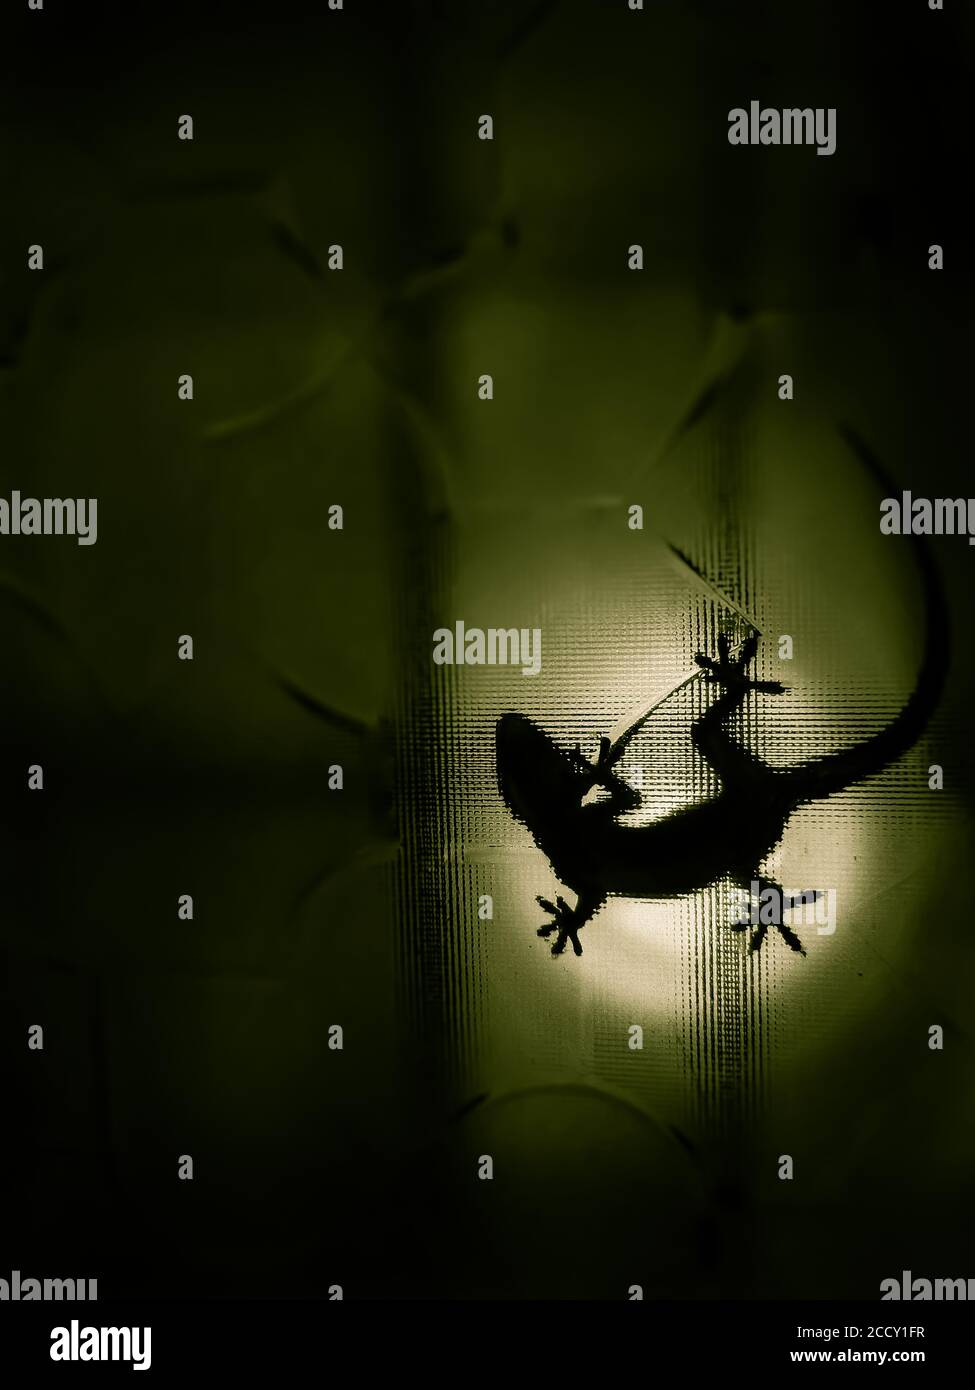 House gecko shadow spotted on green backlight of the textured glass. Stock Photo